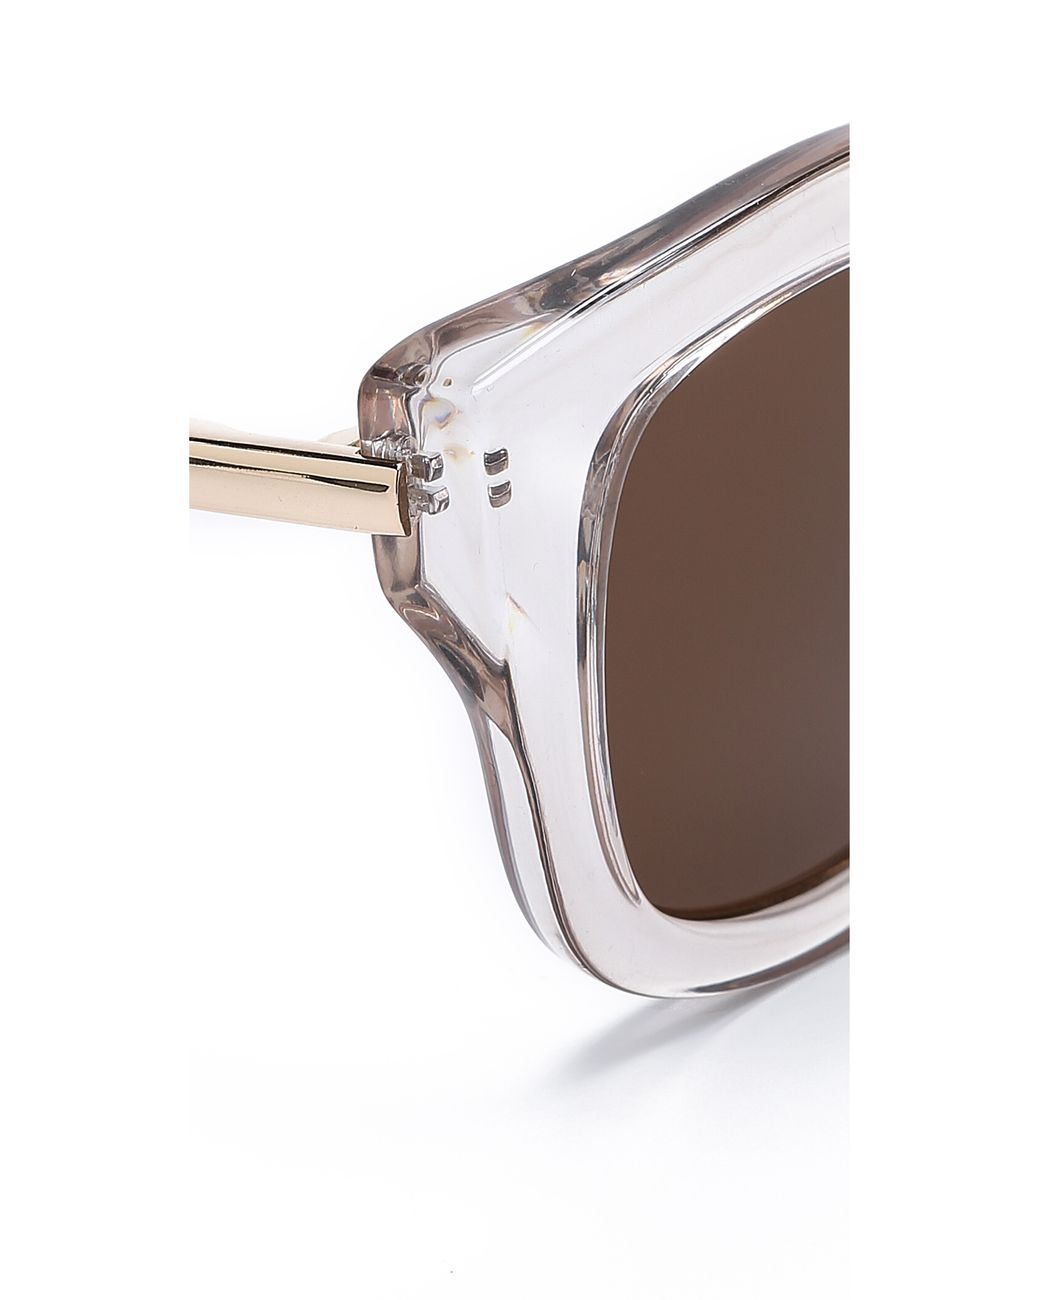 Le Specs Runway Luxe Sunglasses in Natural | Lyst